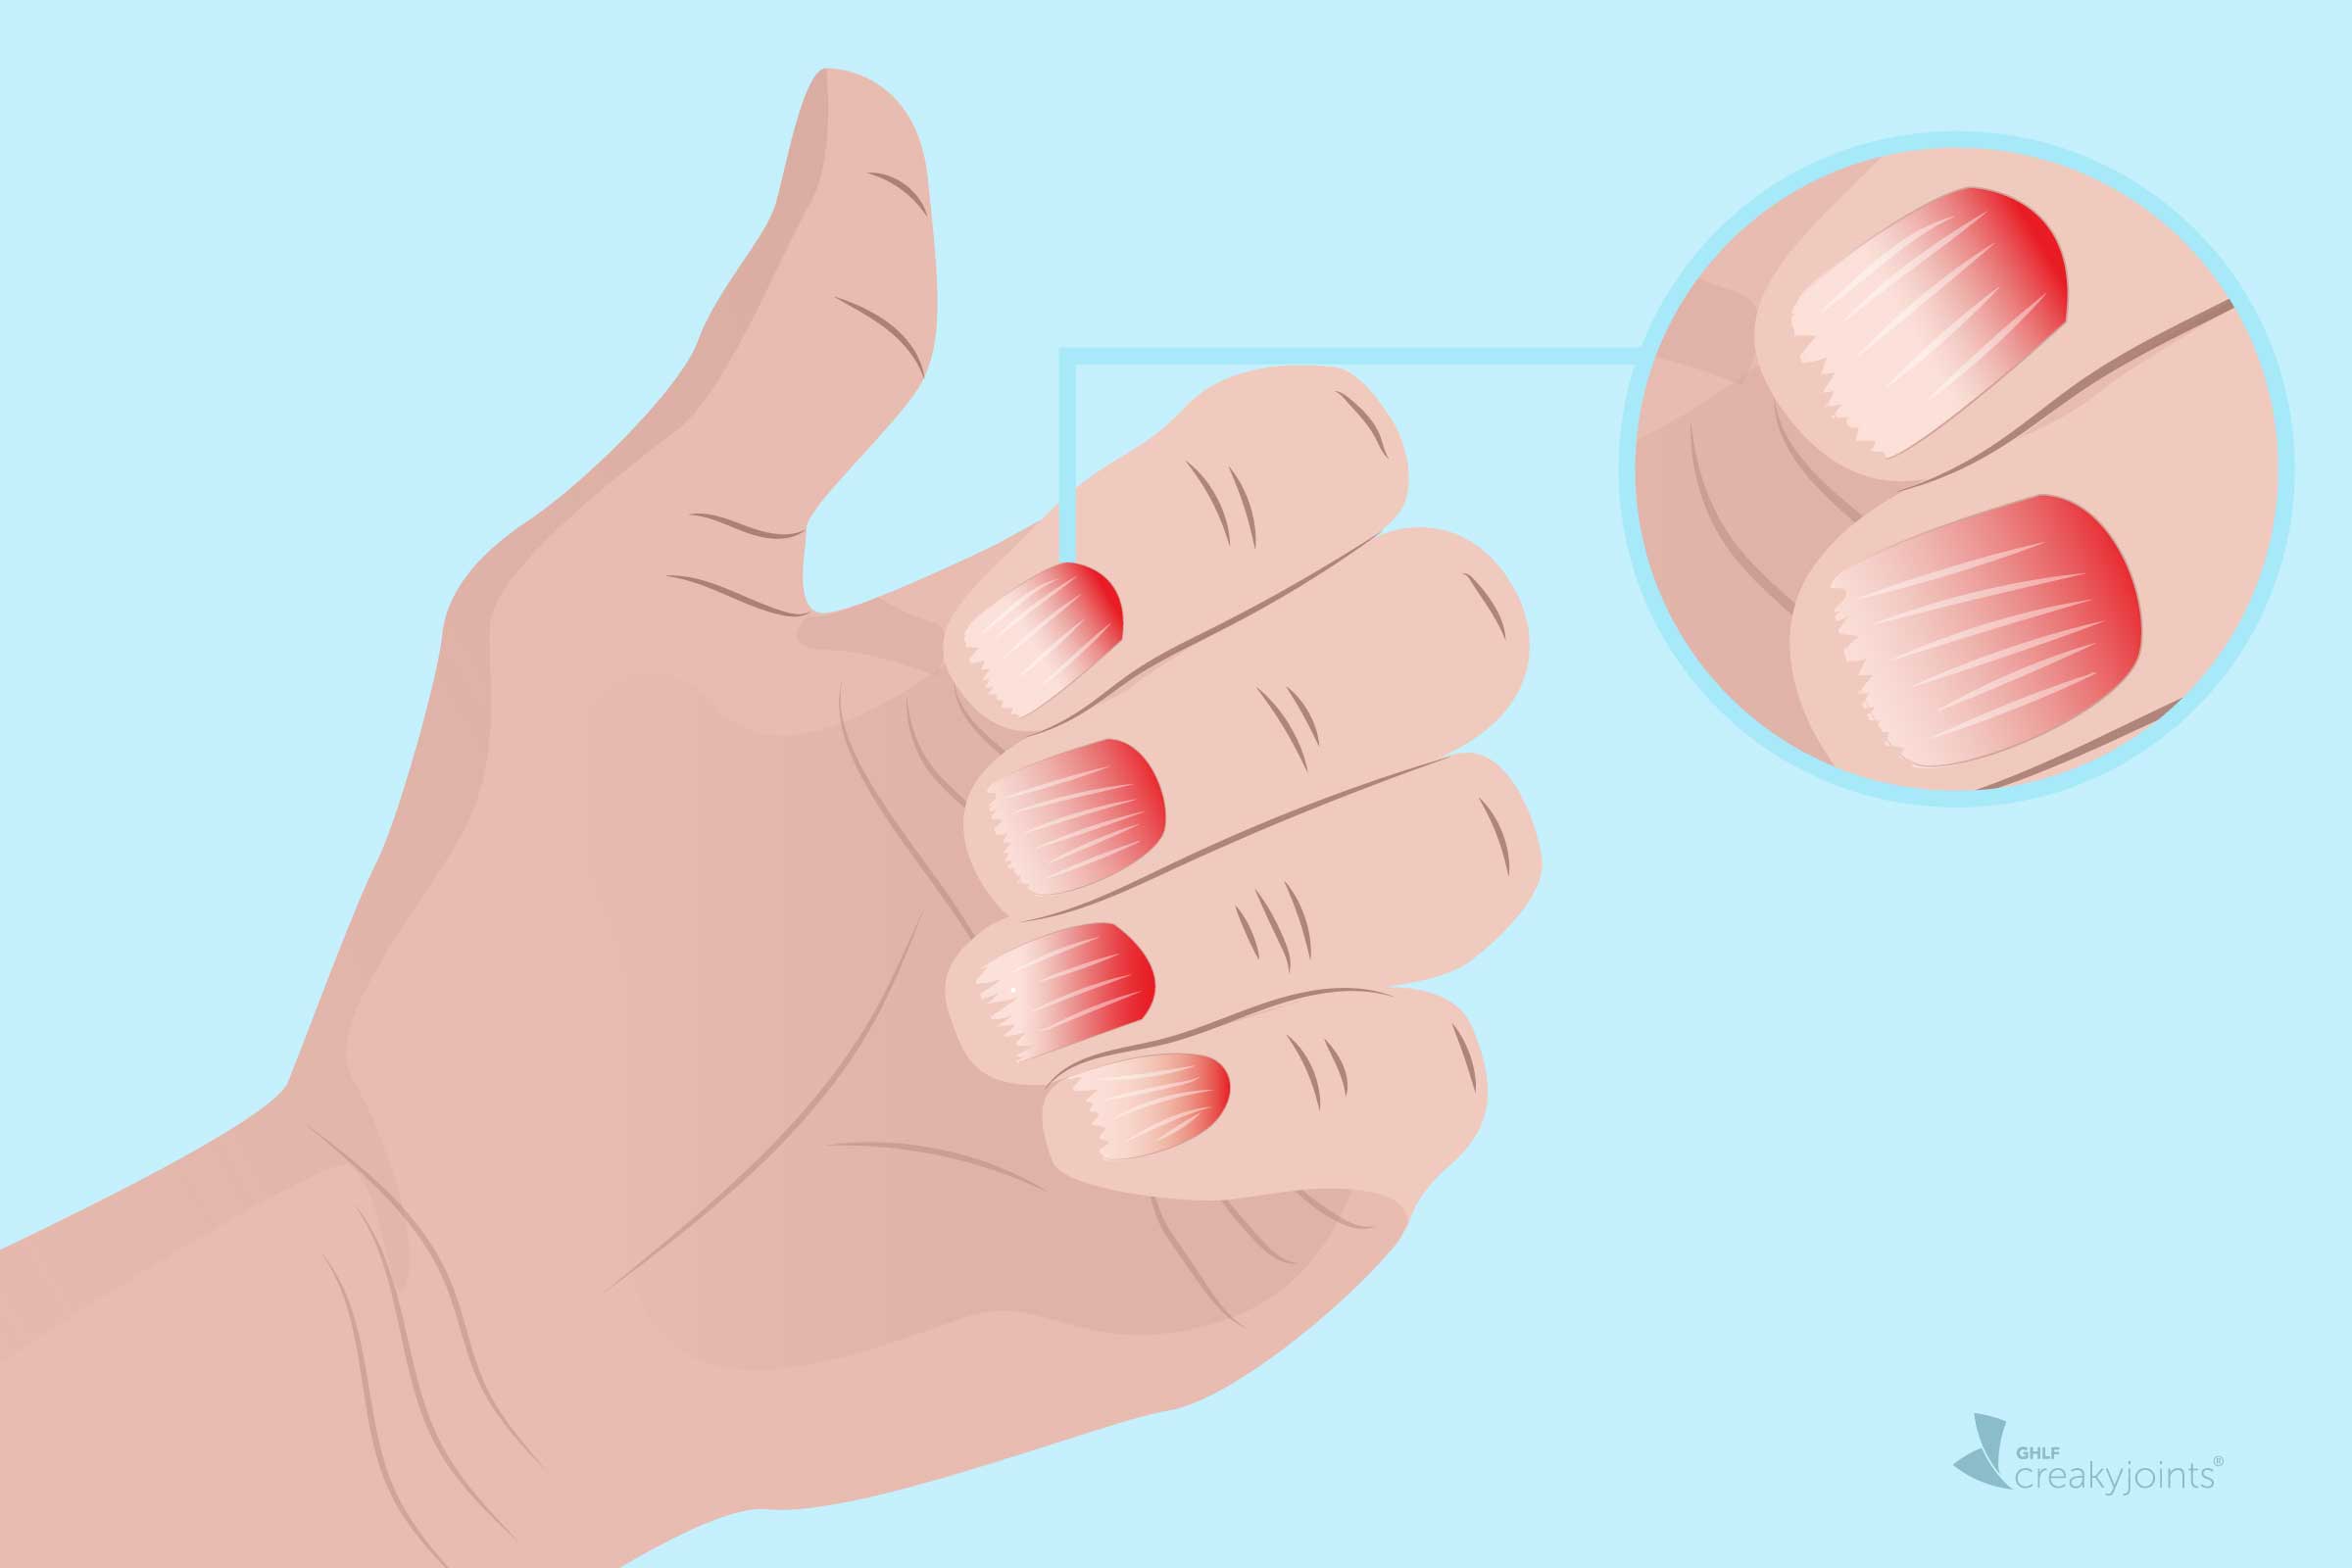 Nail Psoriasis Vs Nail Fungus – Know The Difference